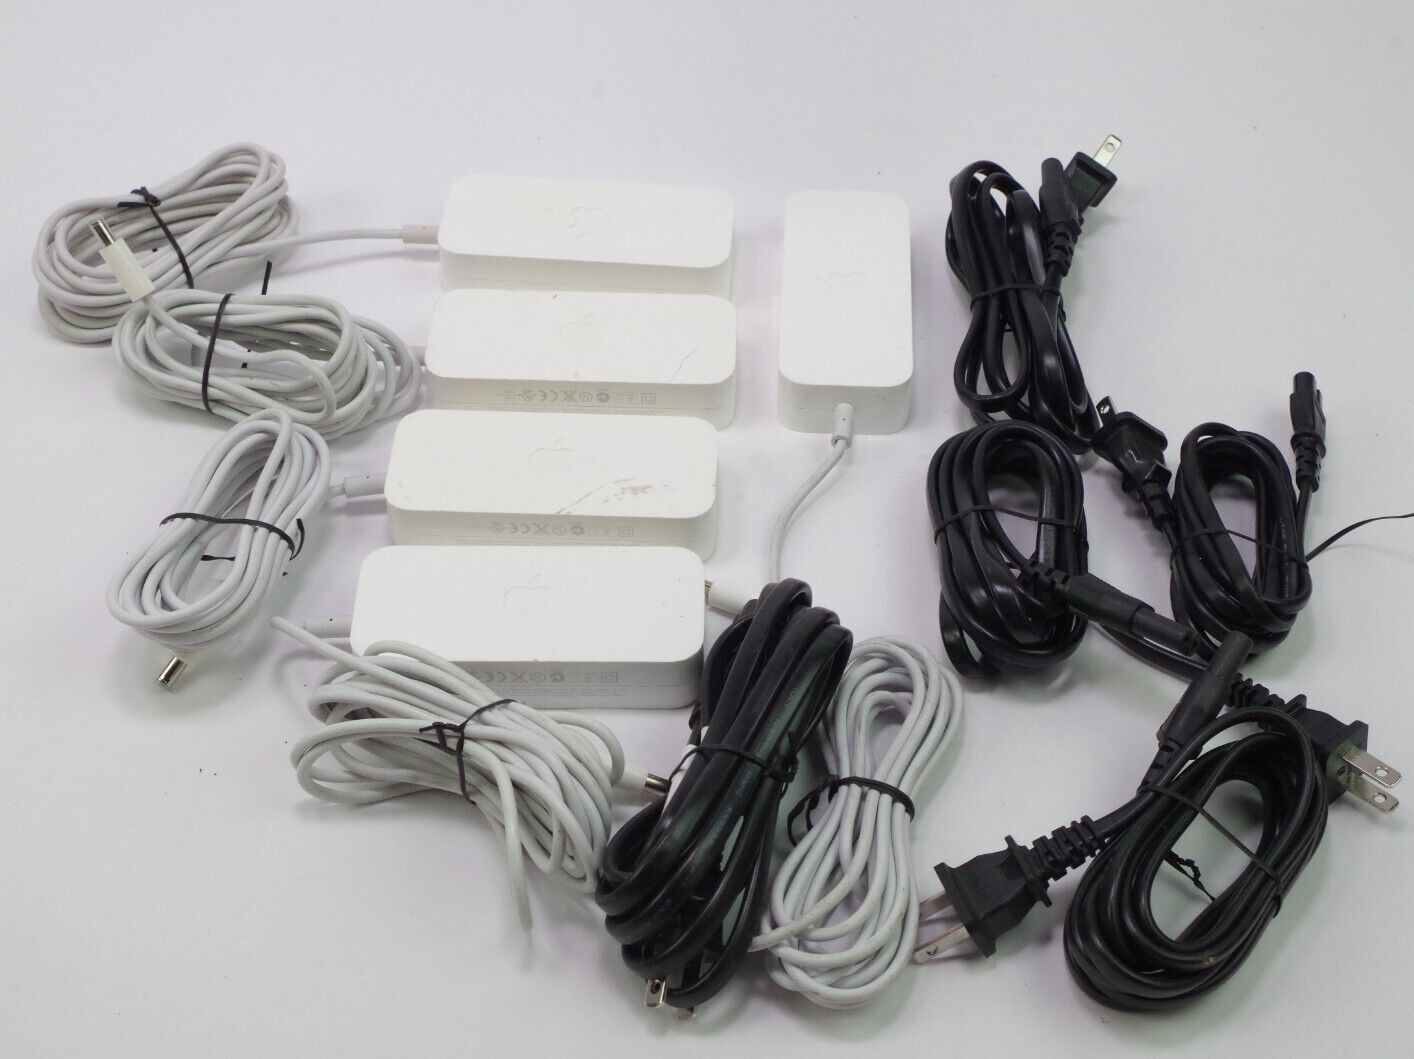 Lot of 5 Genuine Apple AC Adapter Power Supply A1202 Airport Extreme Power Cords